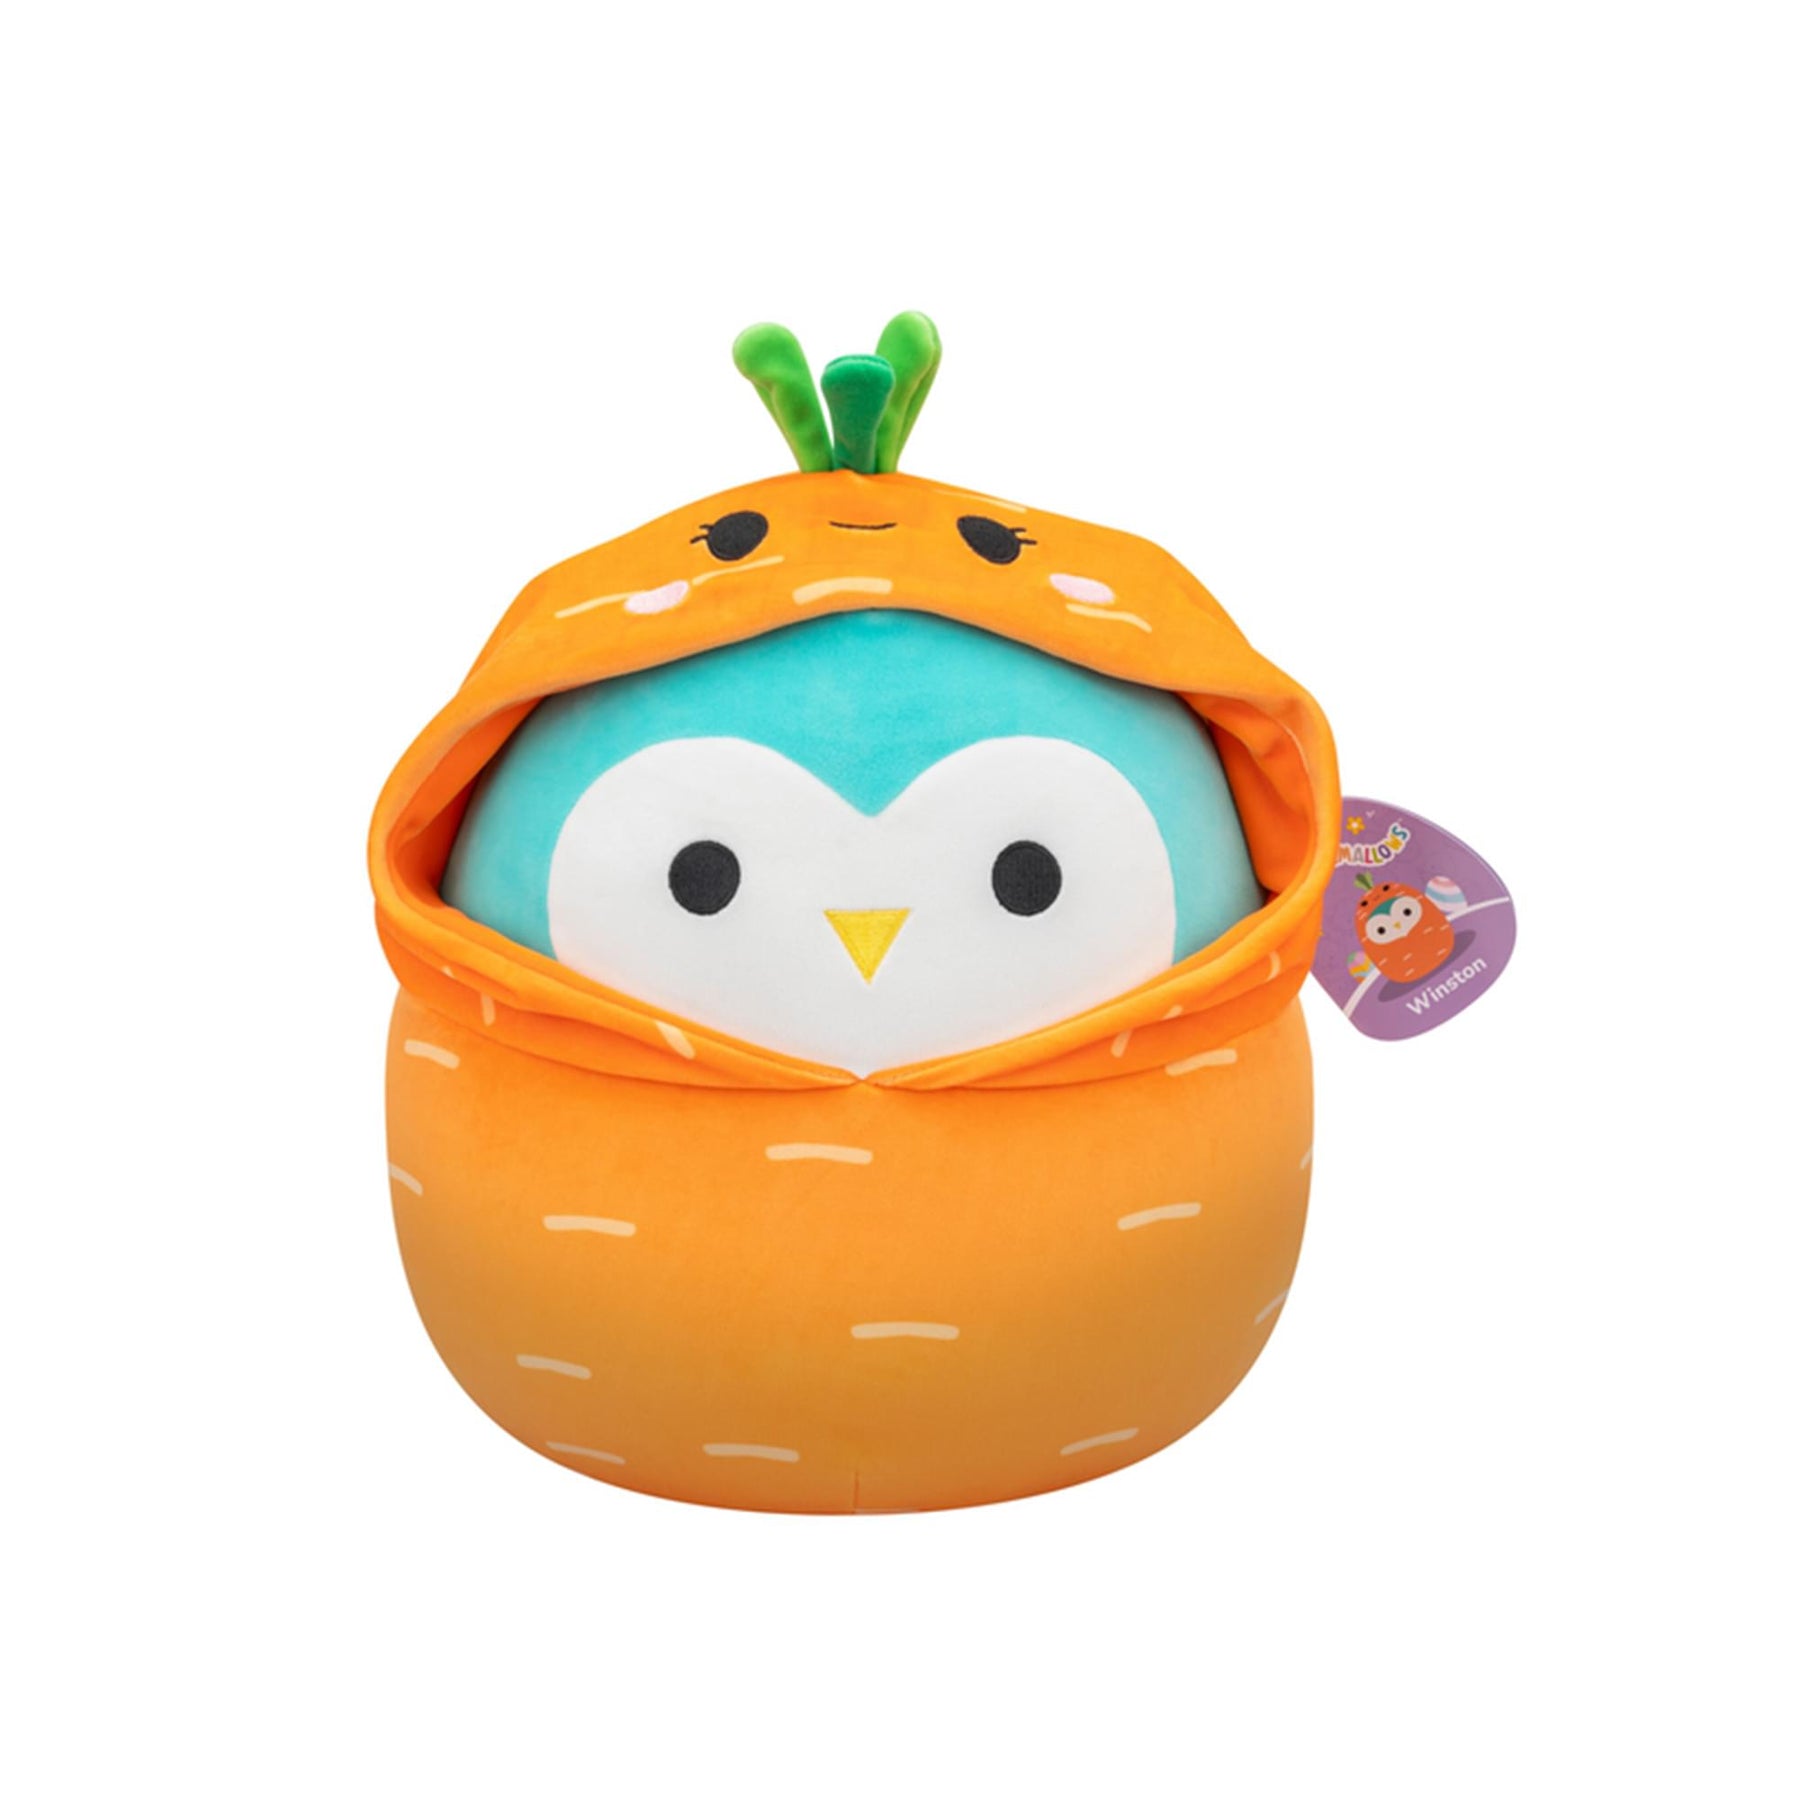 Squishmallows Easter Squad 12 Inch Plush | Winston the Owl in Carrot Hoodie